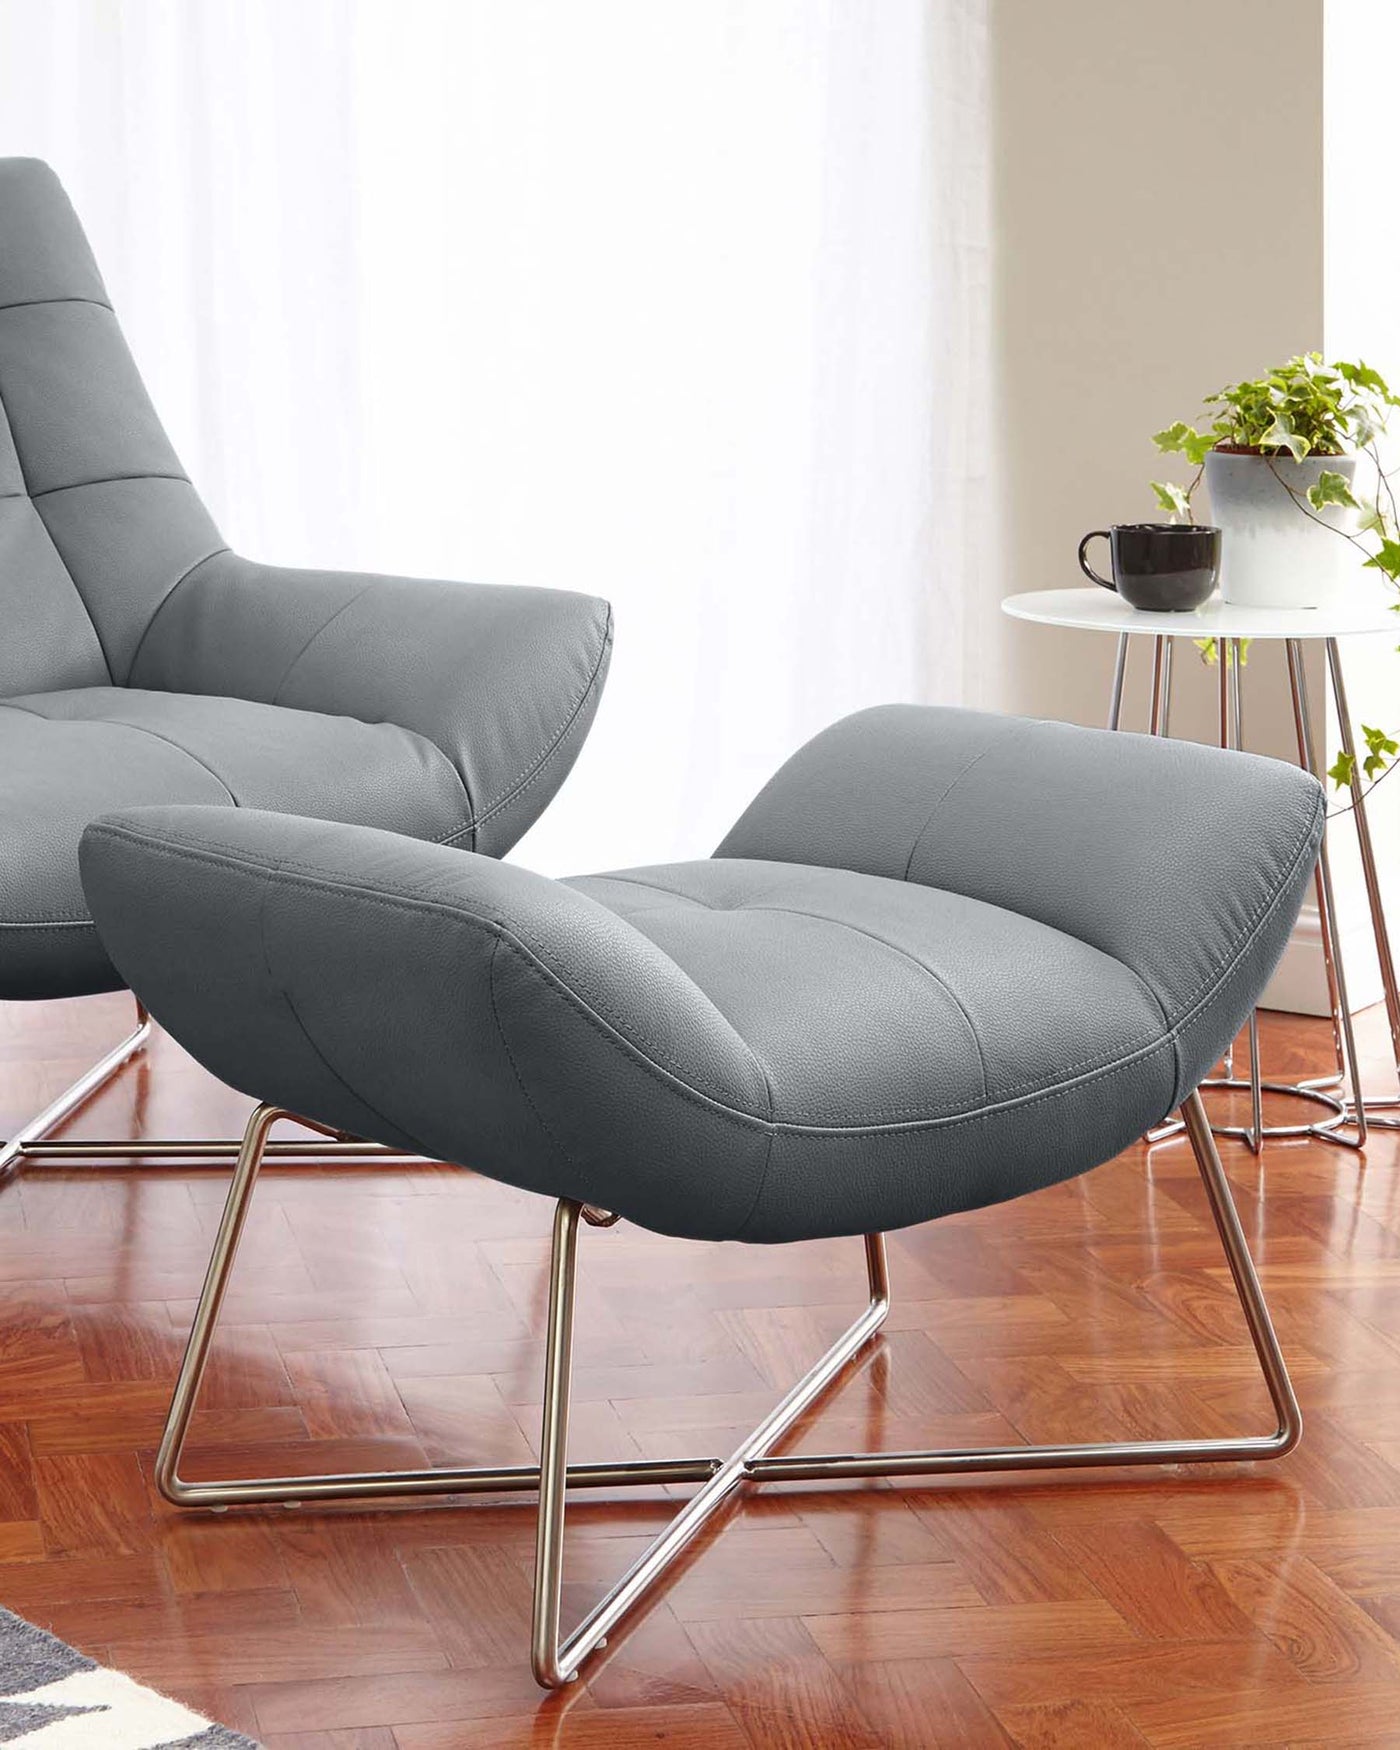 Modern grey upholstered lounge chair and matching ottoman with sleek chrome bases, positioned on a hardwood floor next to a small white round side table with a potted plant and mug.